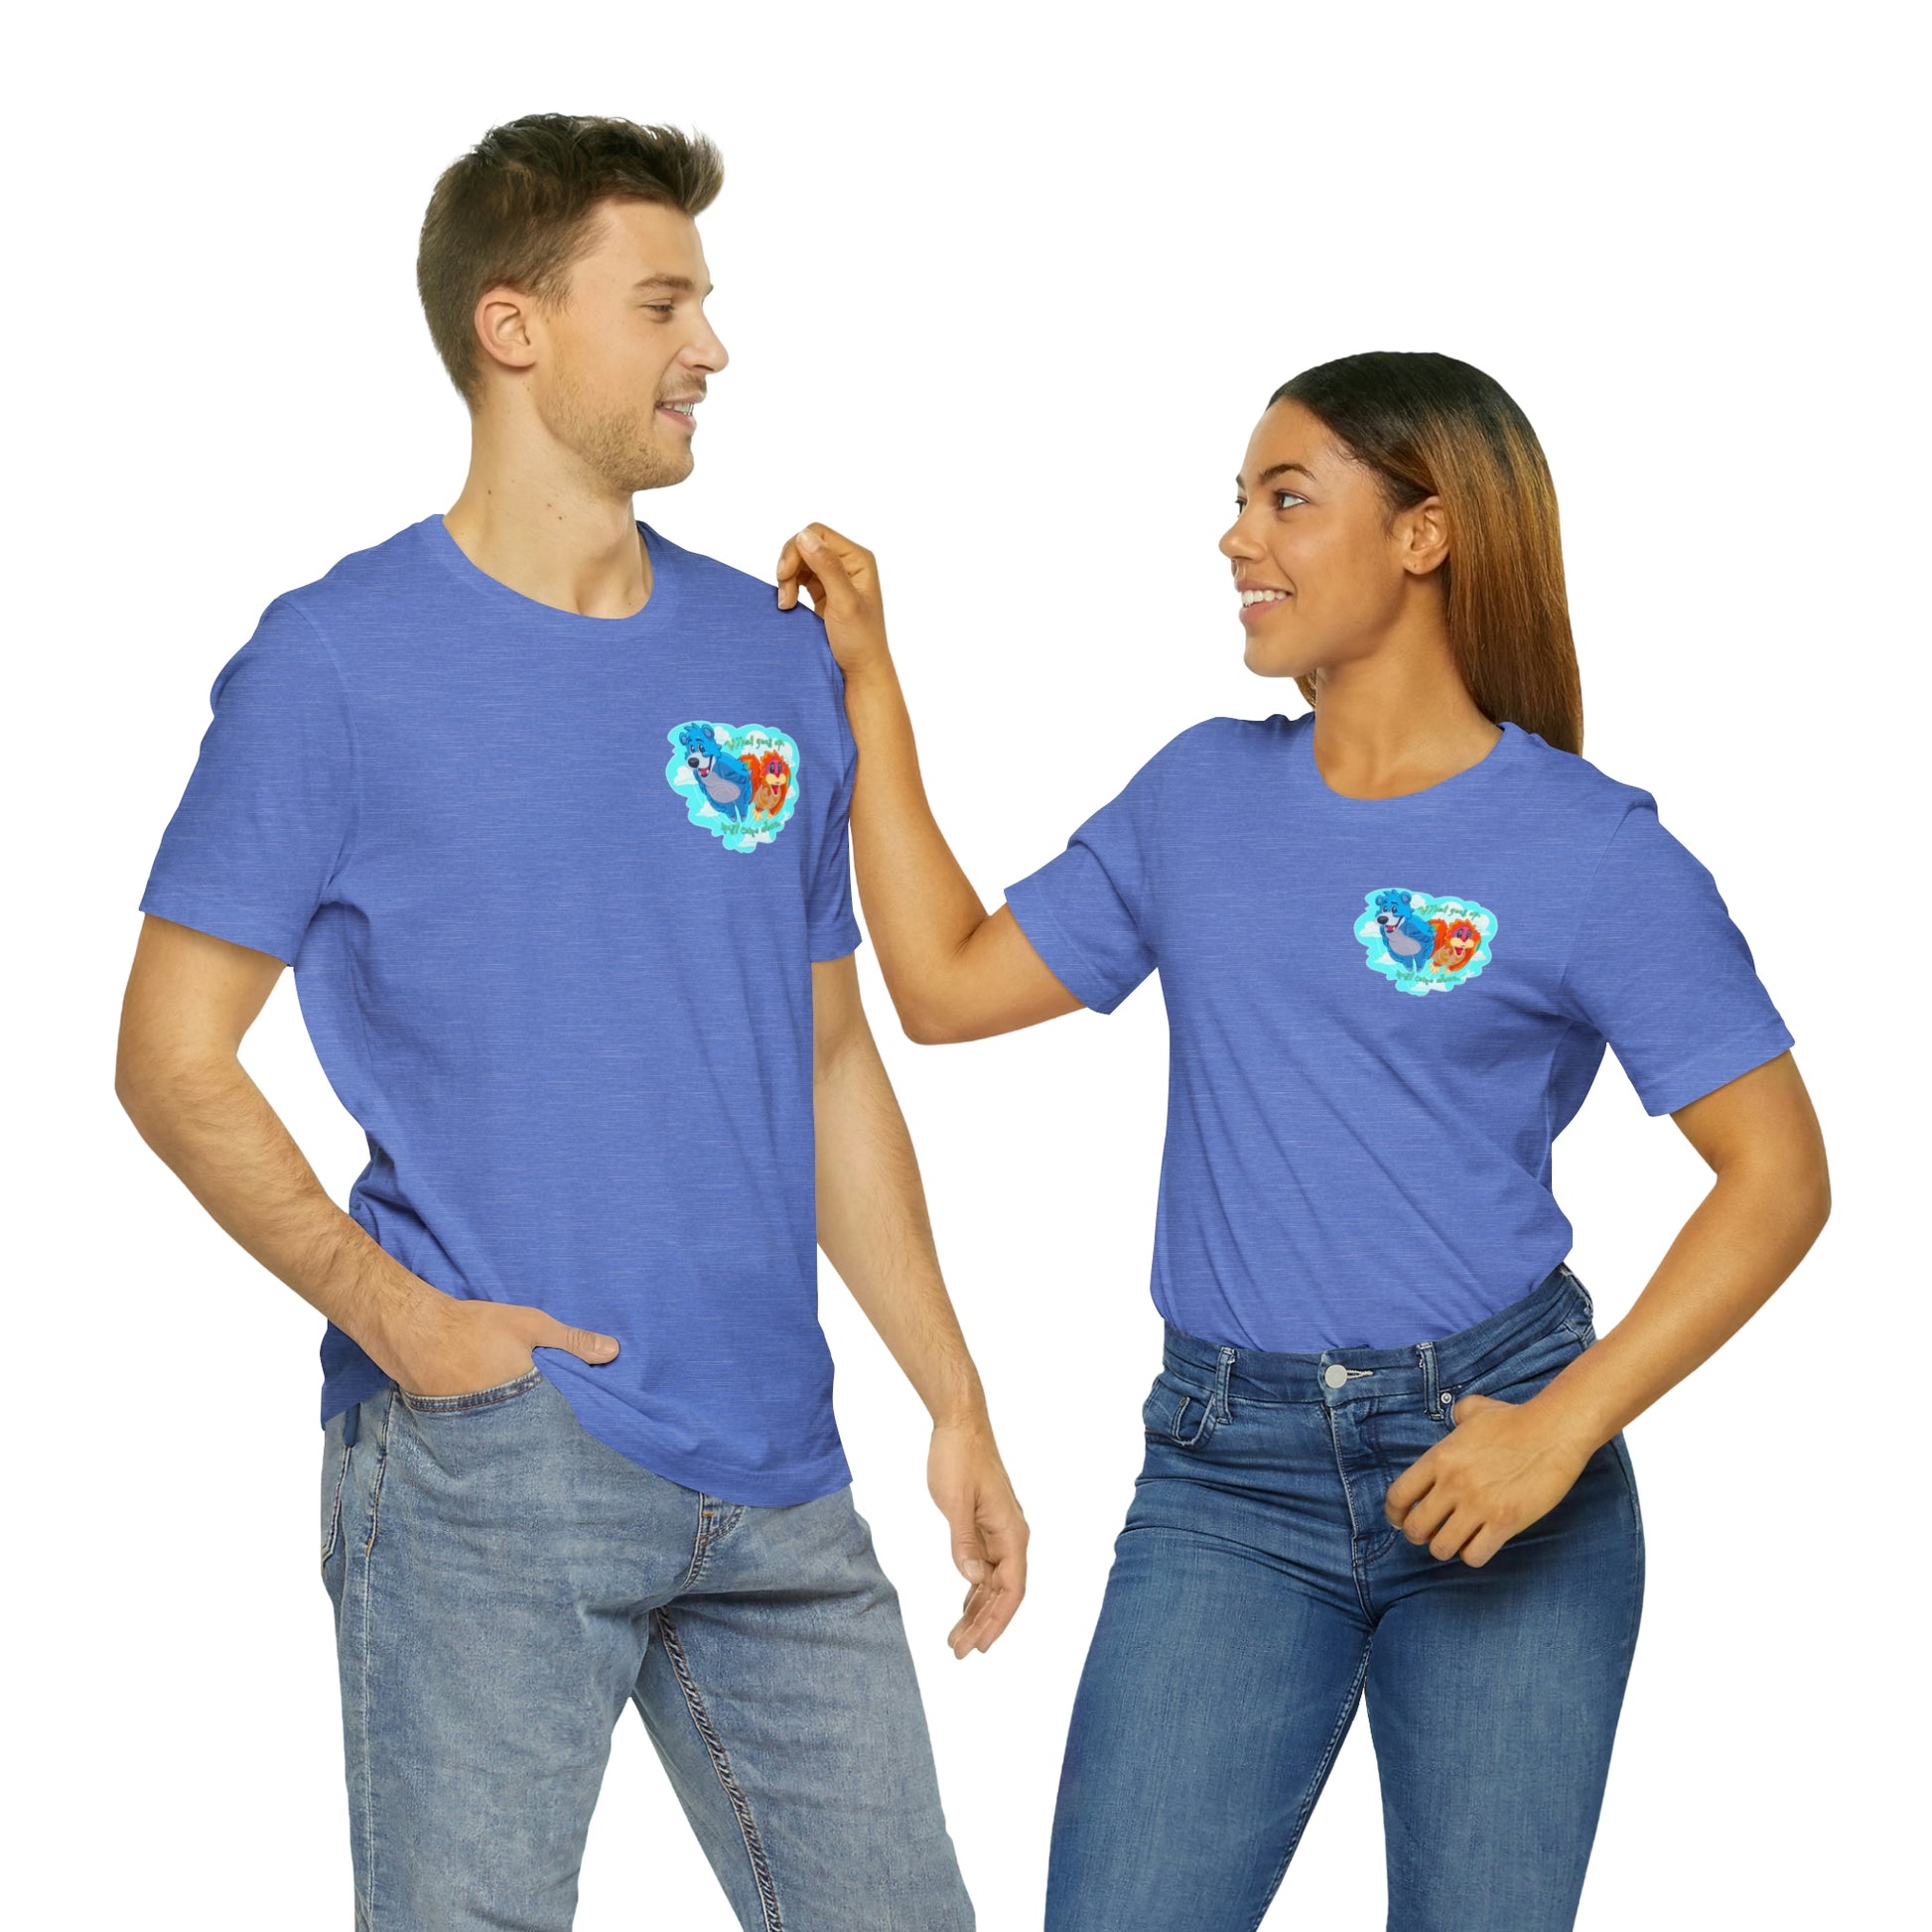 Kite Tails Shirt Mens and Womens Fits